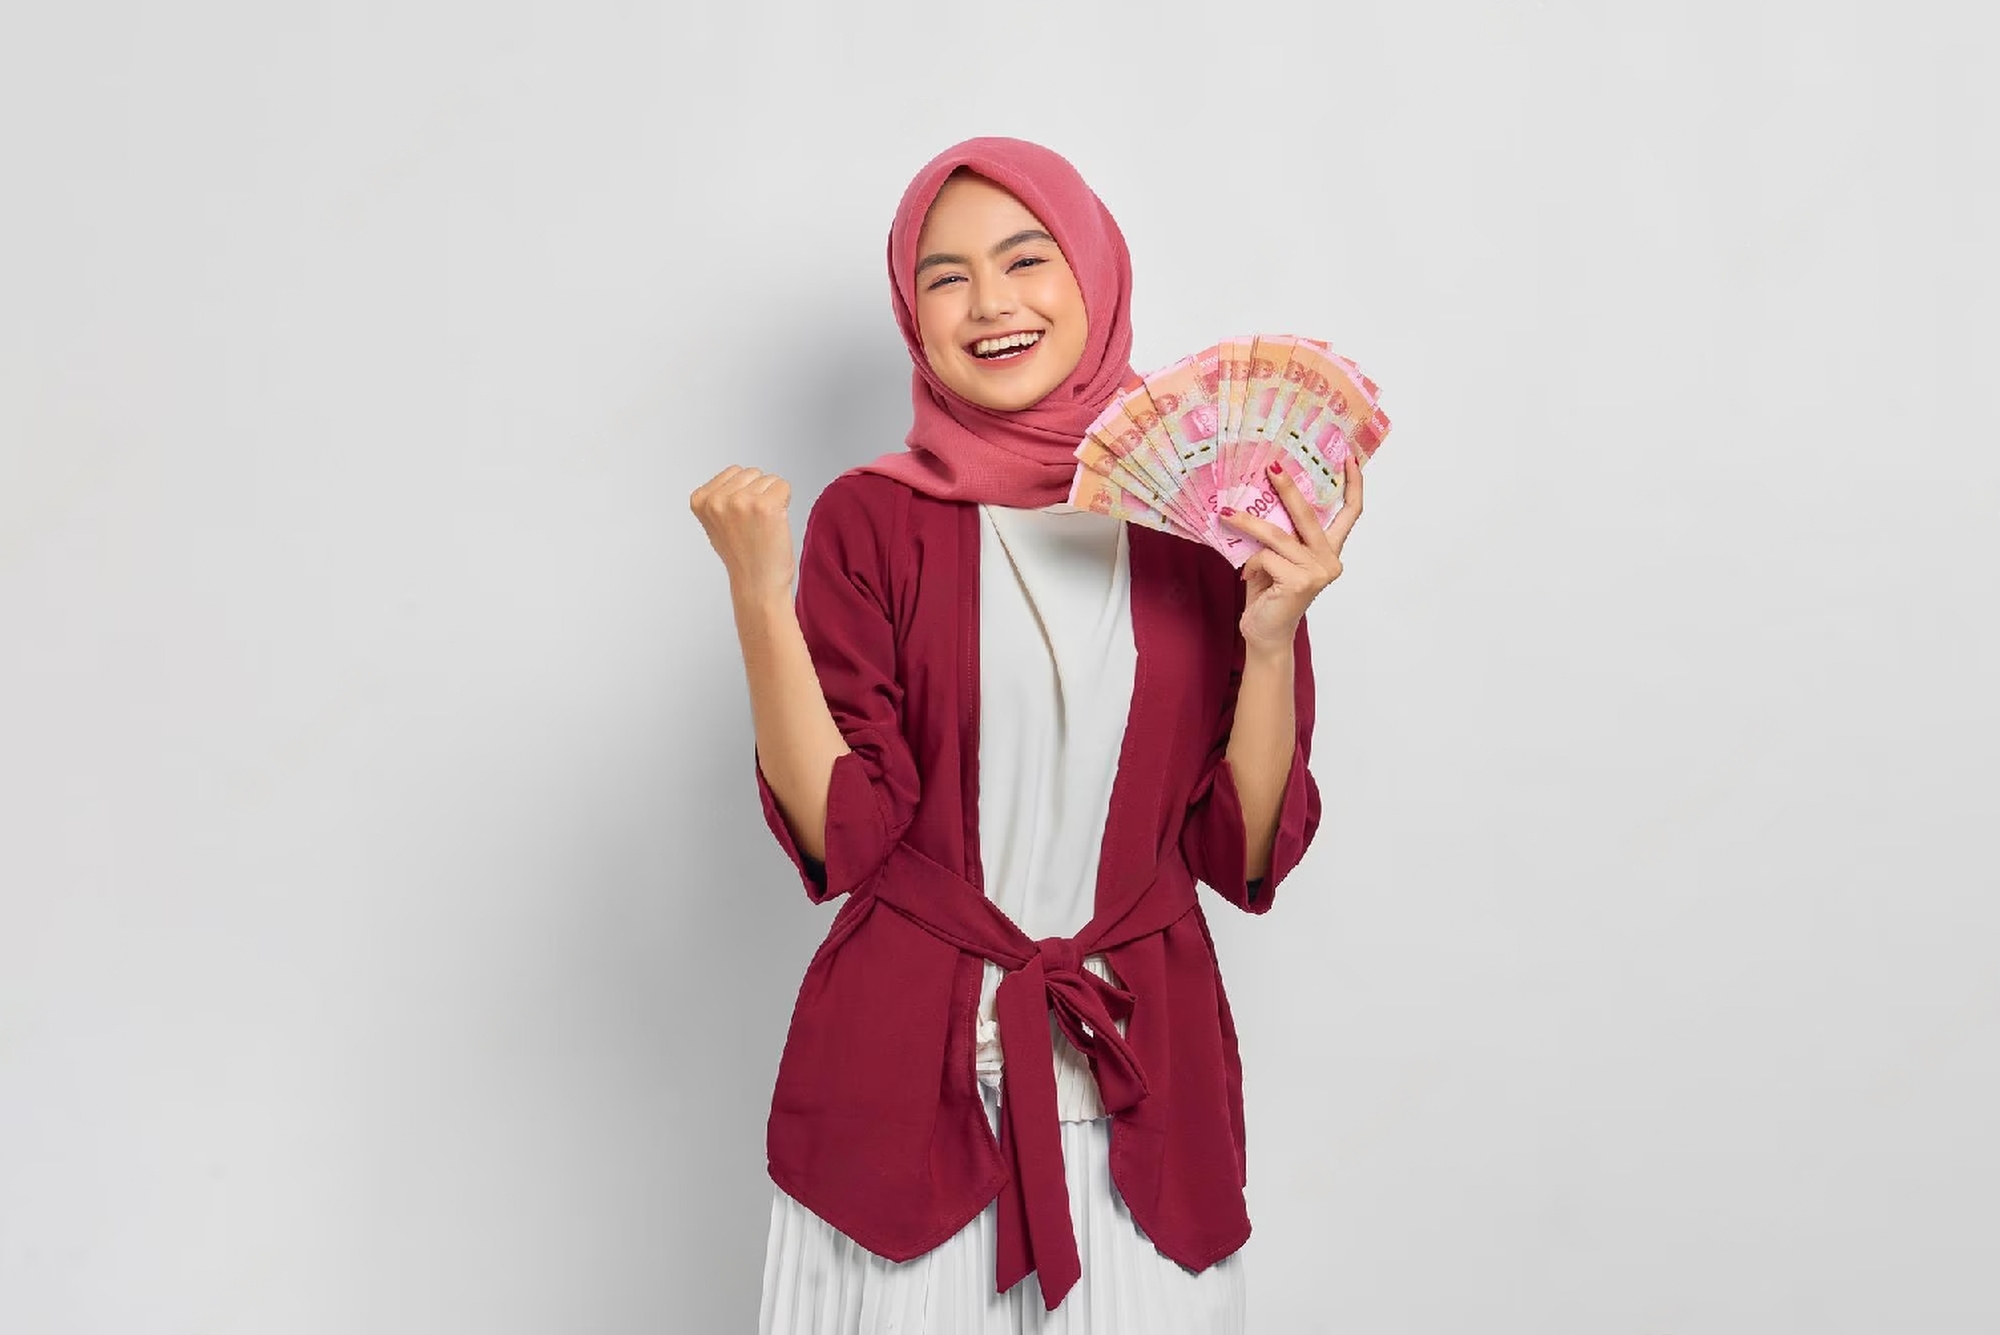 cheerful-beautiful-asian-woman-casual-shirt-hijab-showing-indonesian-rupiah-banknotes-celebrating-luck-isolated-white-background-people-religious-lifestyle-concept_512242-2172-transformed